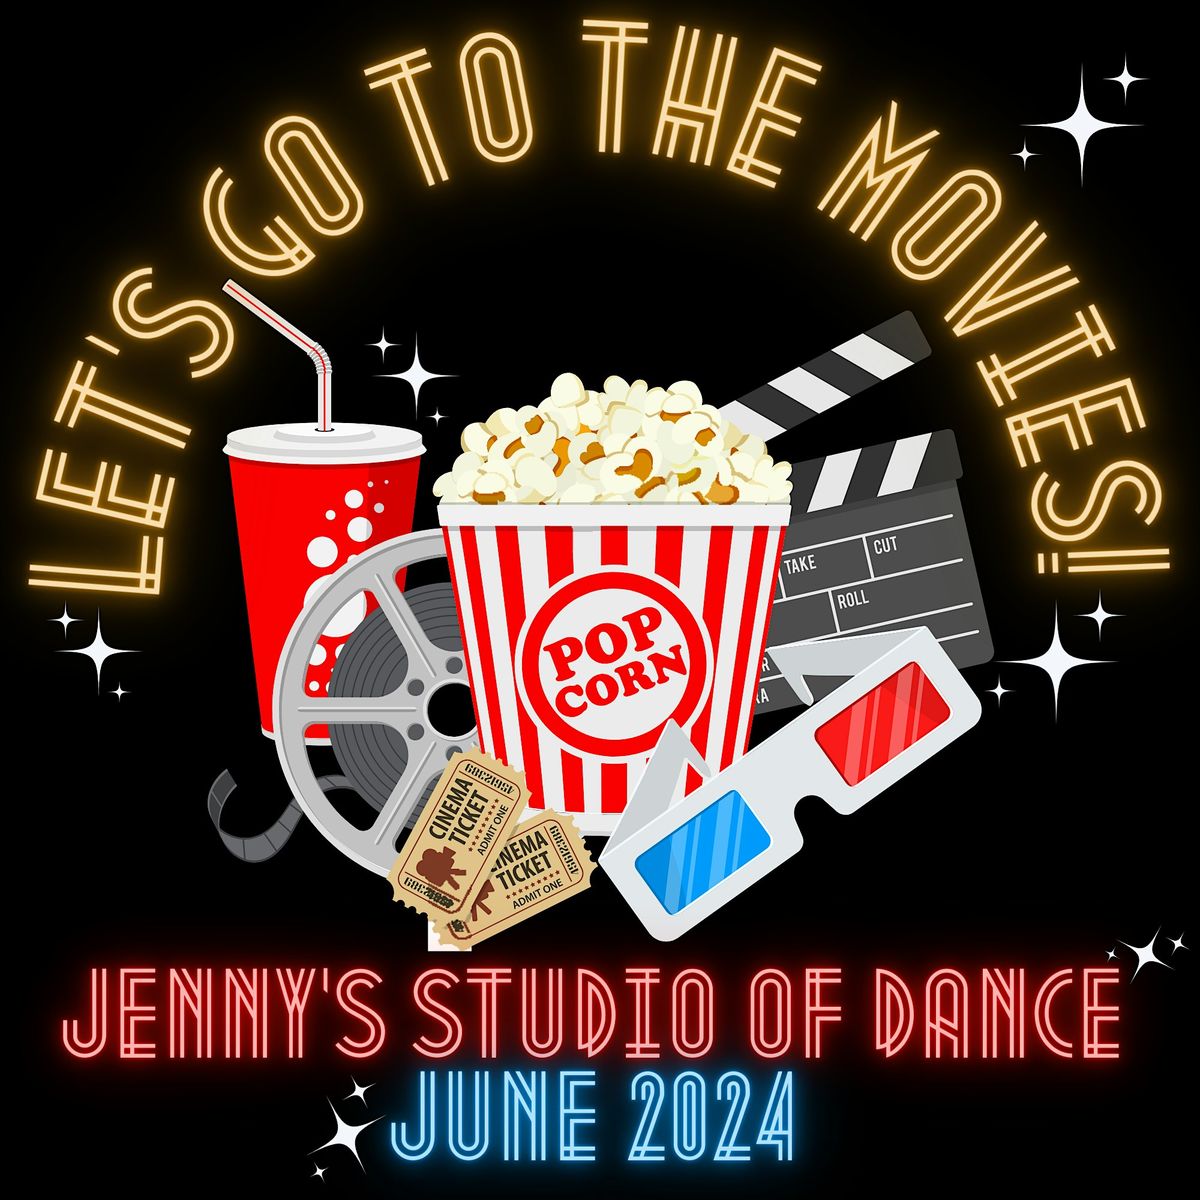 Let\u2019s Go To the Movies - THURSDAY June 6th Show